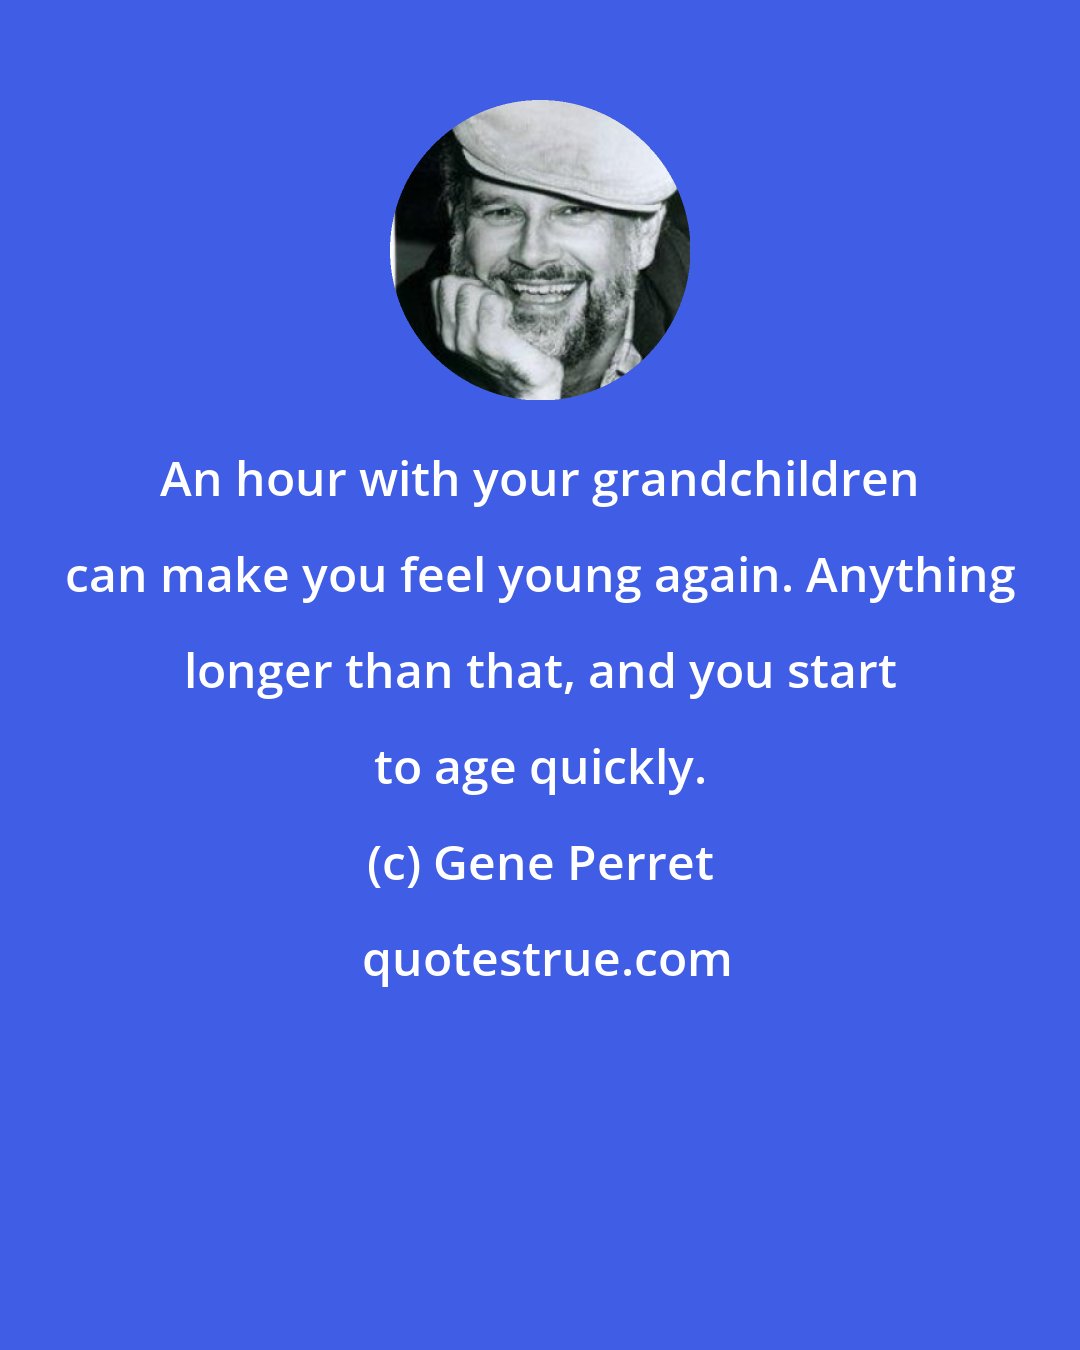 Gene Perret: An hour with your grandchildren can make you feel young again. Anything longer than that, and you start to age quickly.